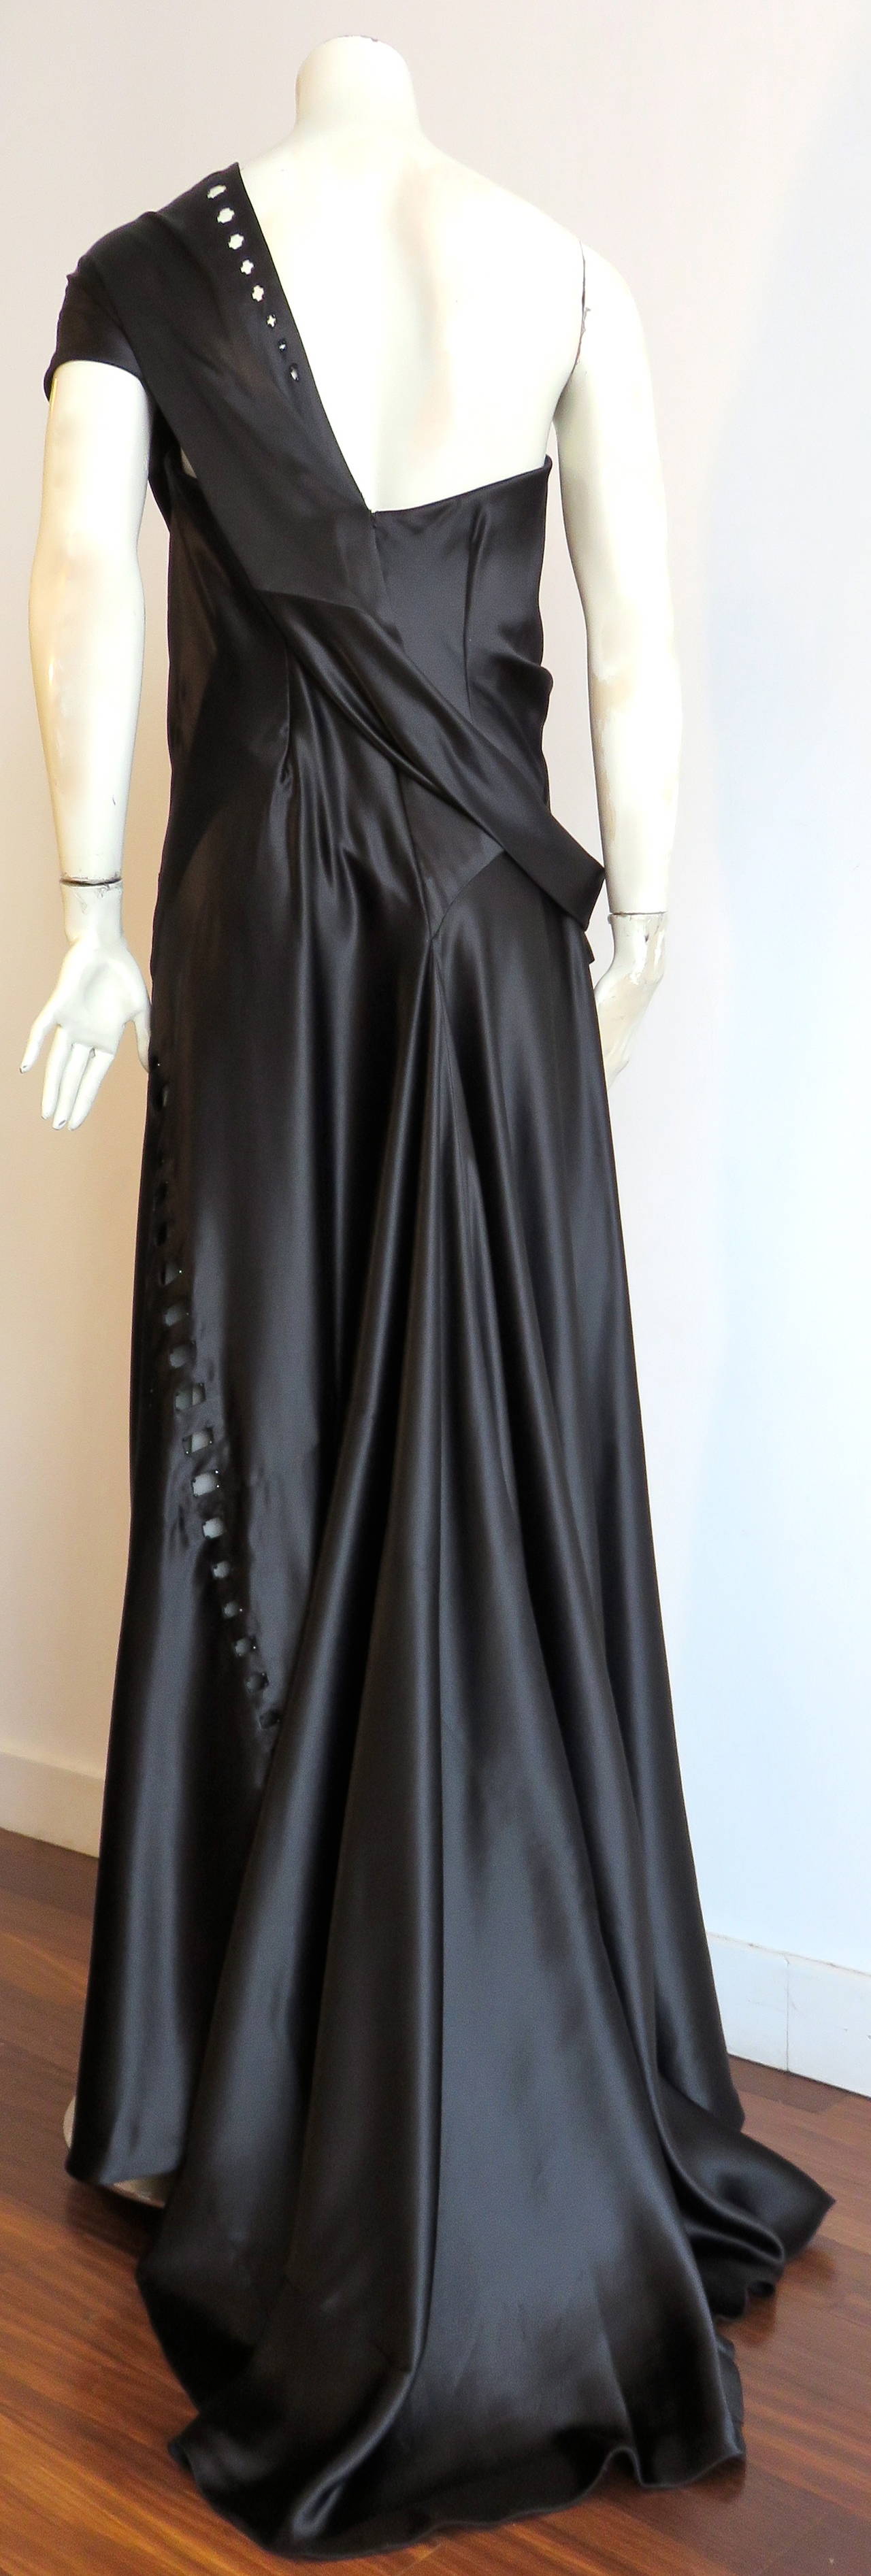 Women's MARC JACOBS Silk charmeuse evening gown dress For Sale